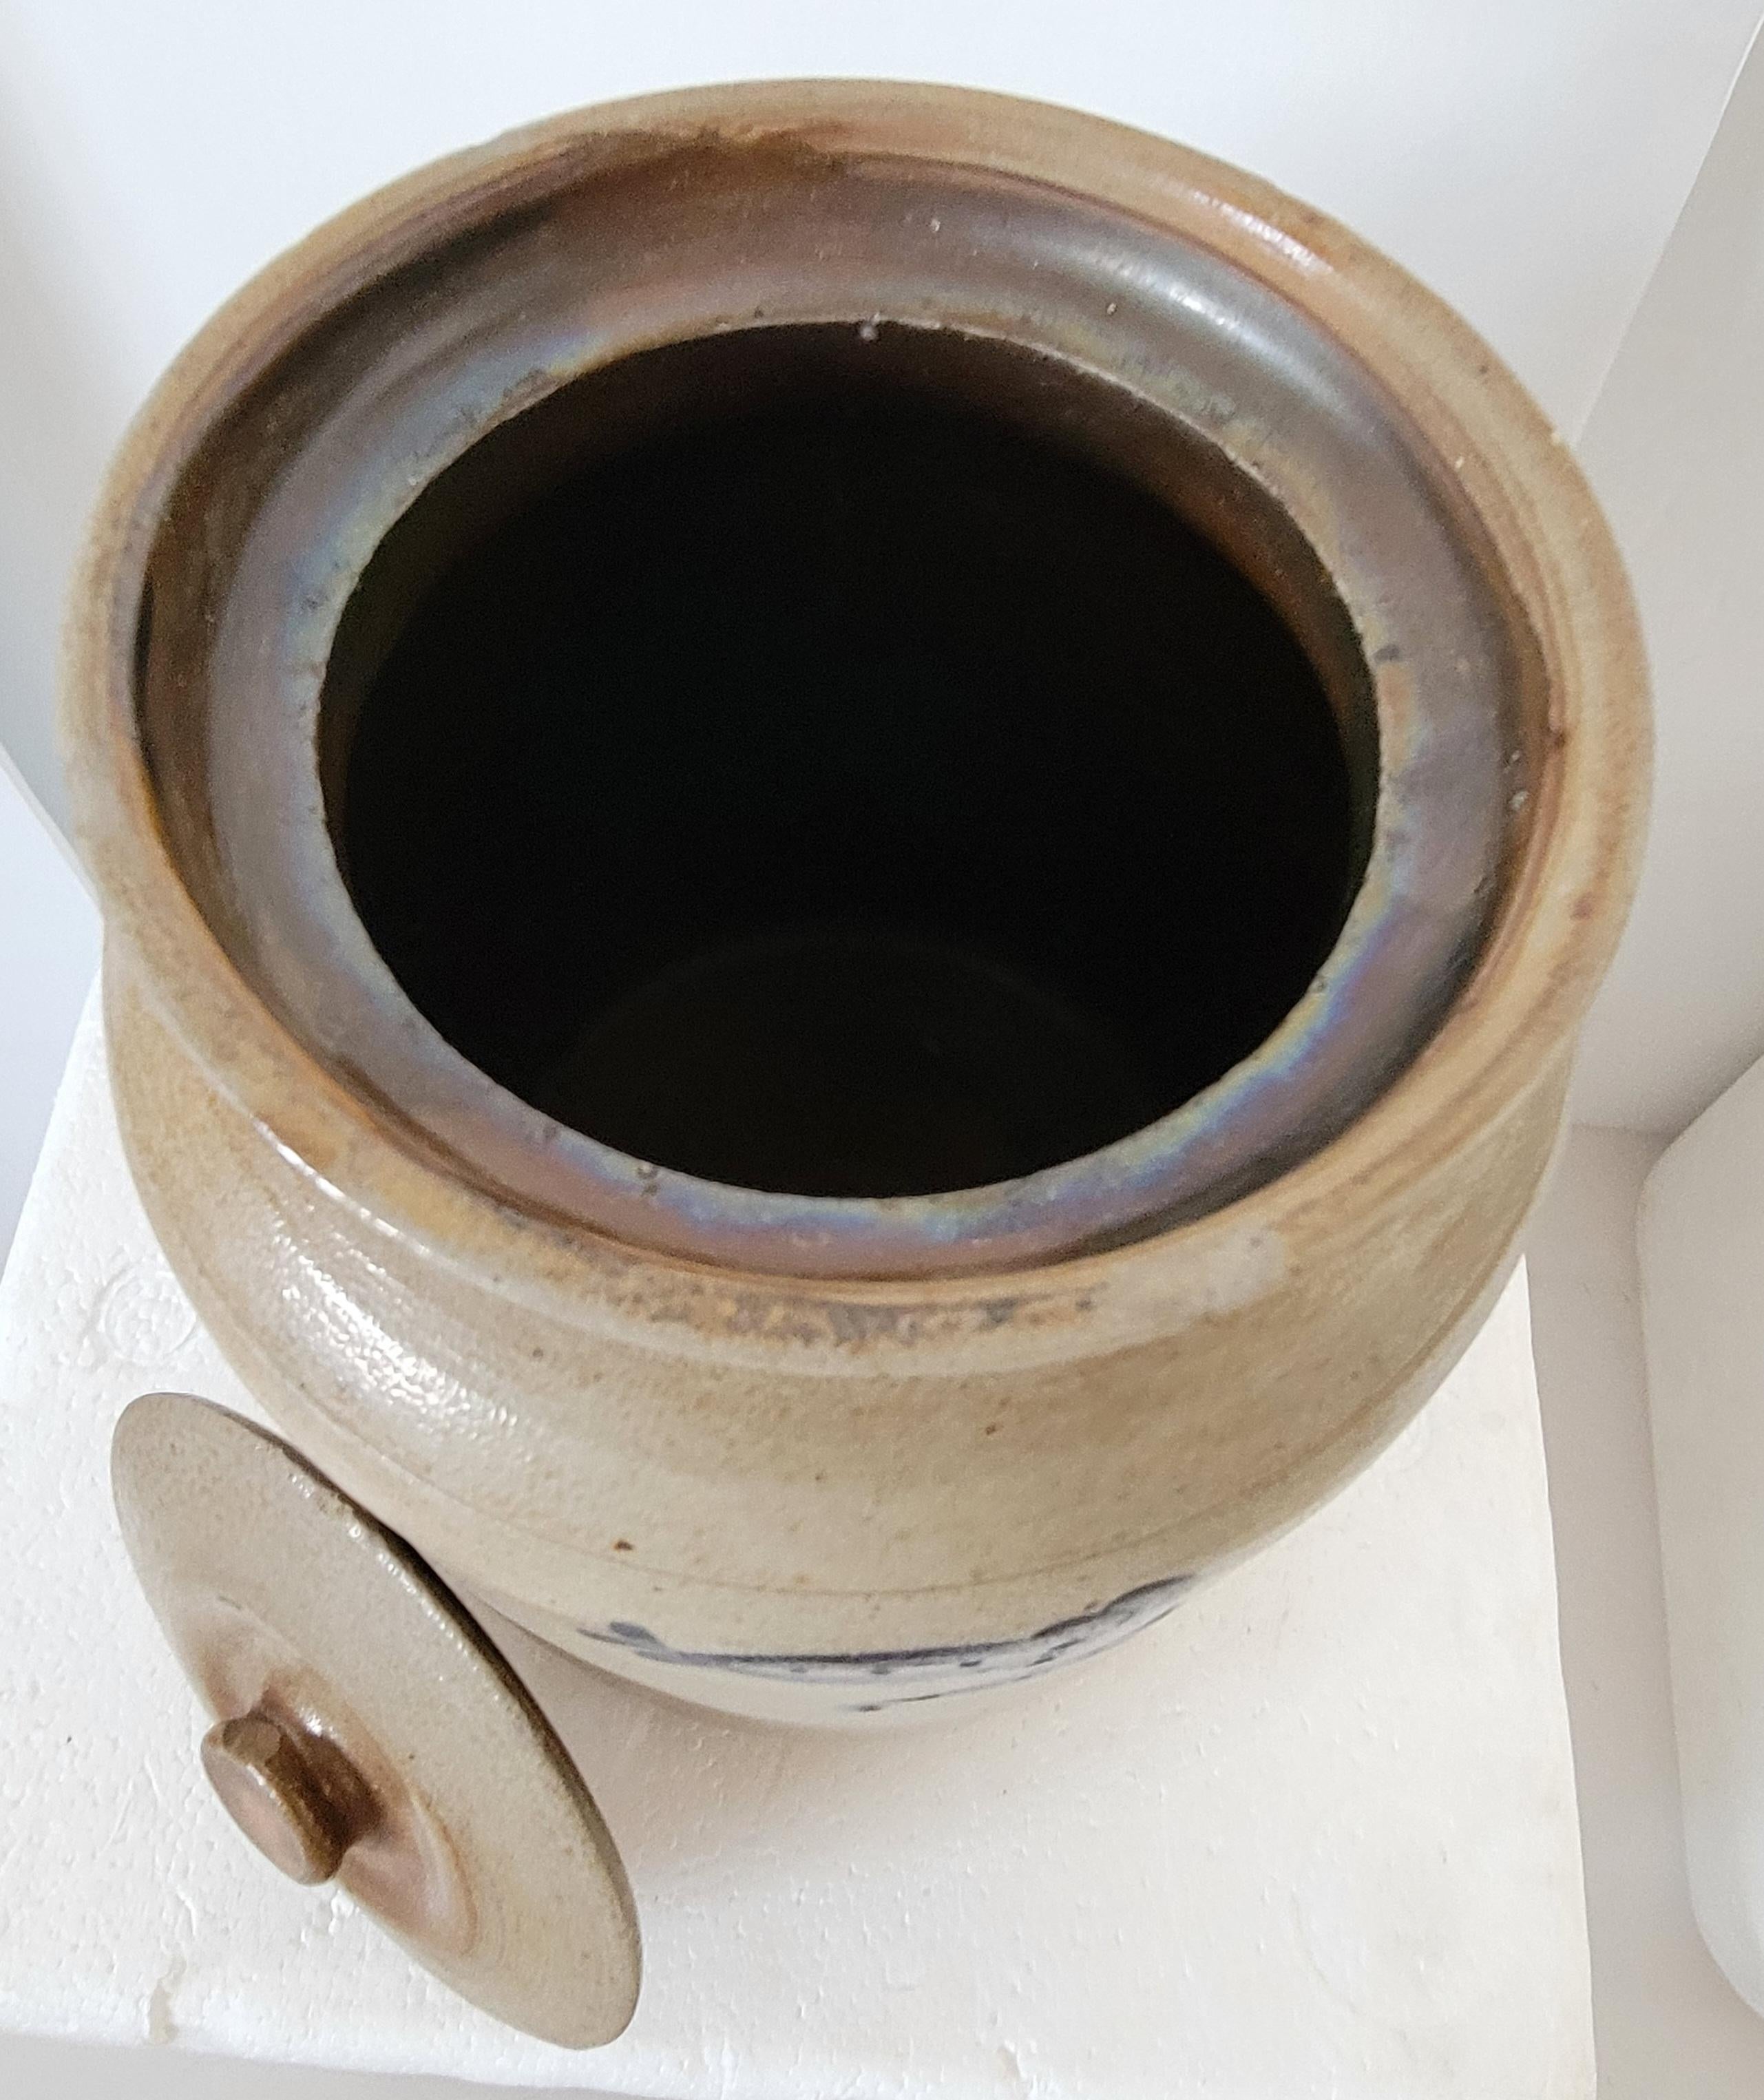 This fine 19Thc stoneware canister is in fine condition with minor chip on back side rim. There are no cracks in this crock or lid. It was found in Pennsylvania.